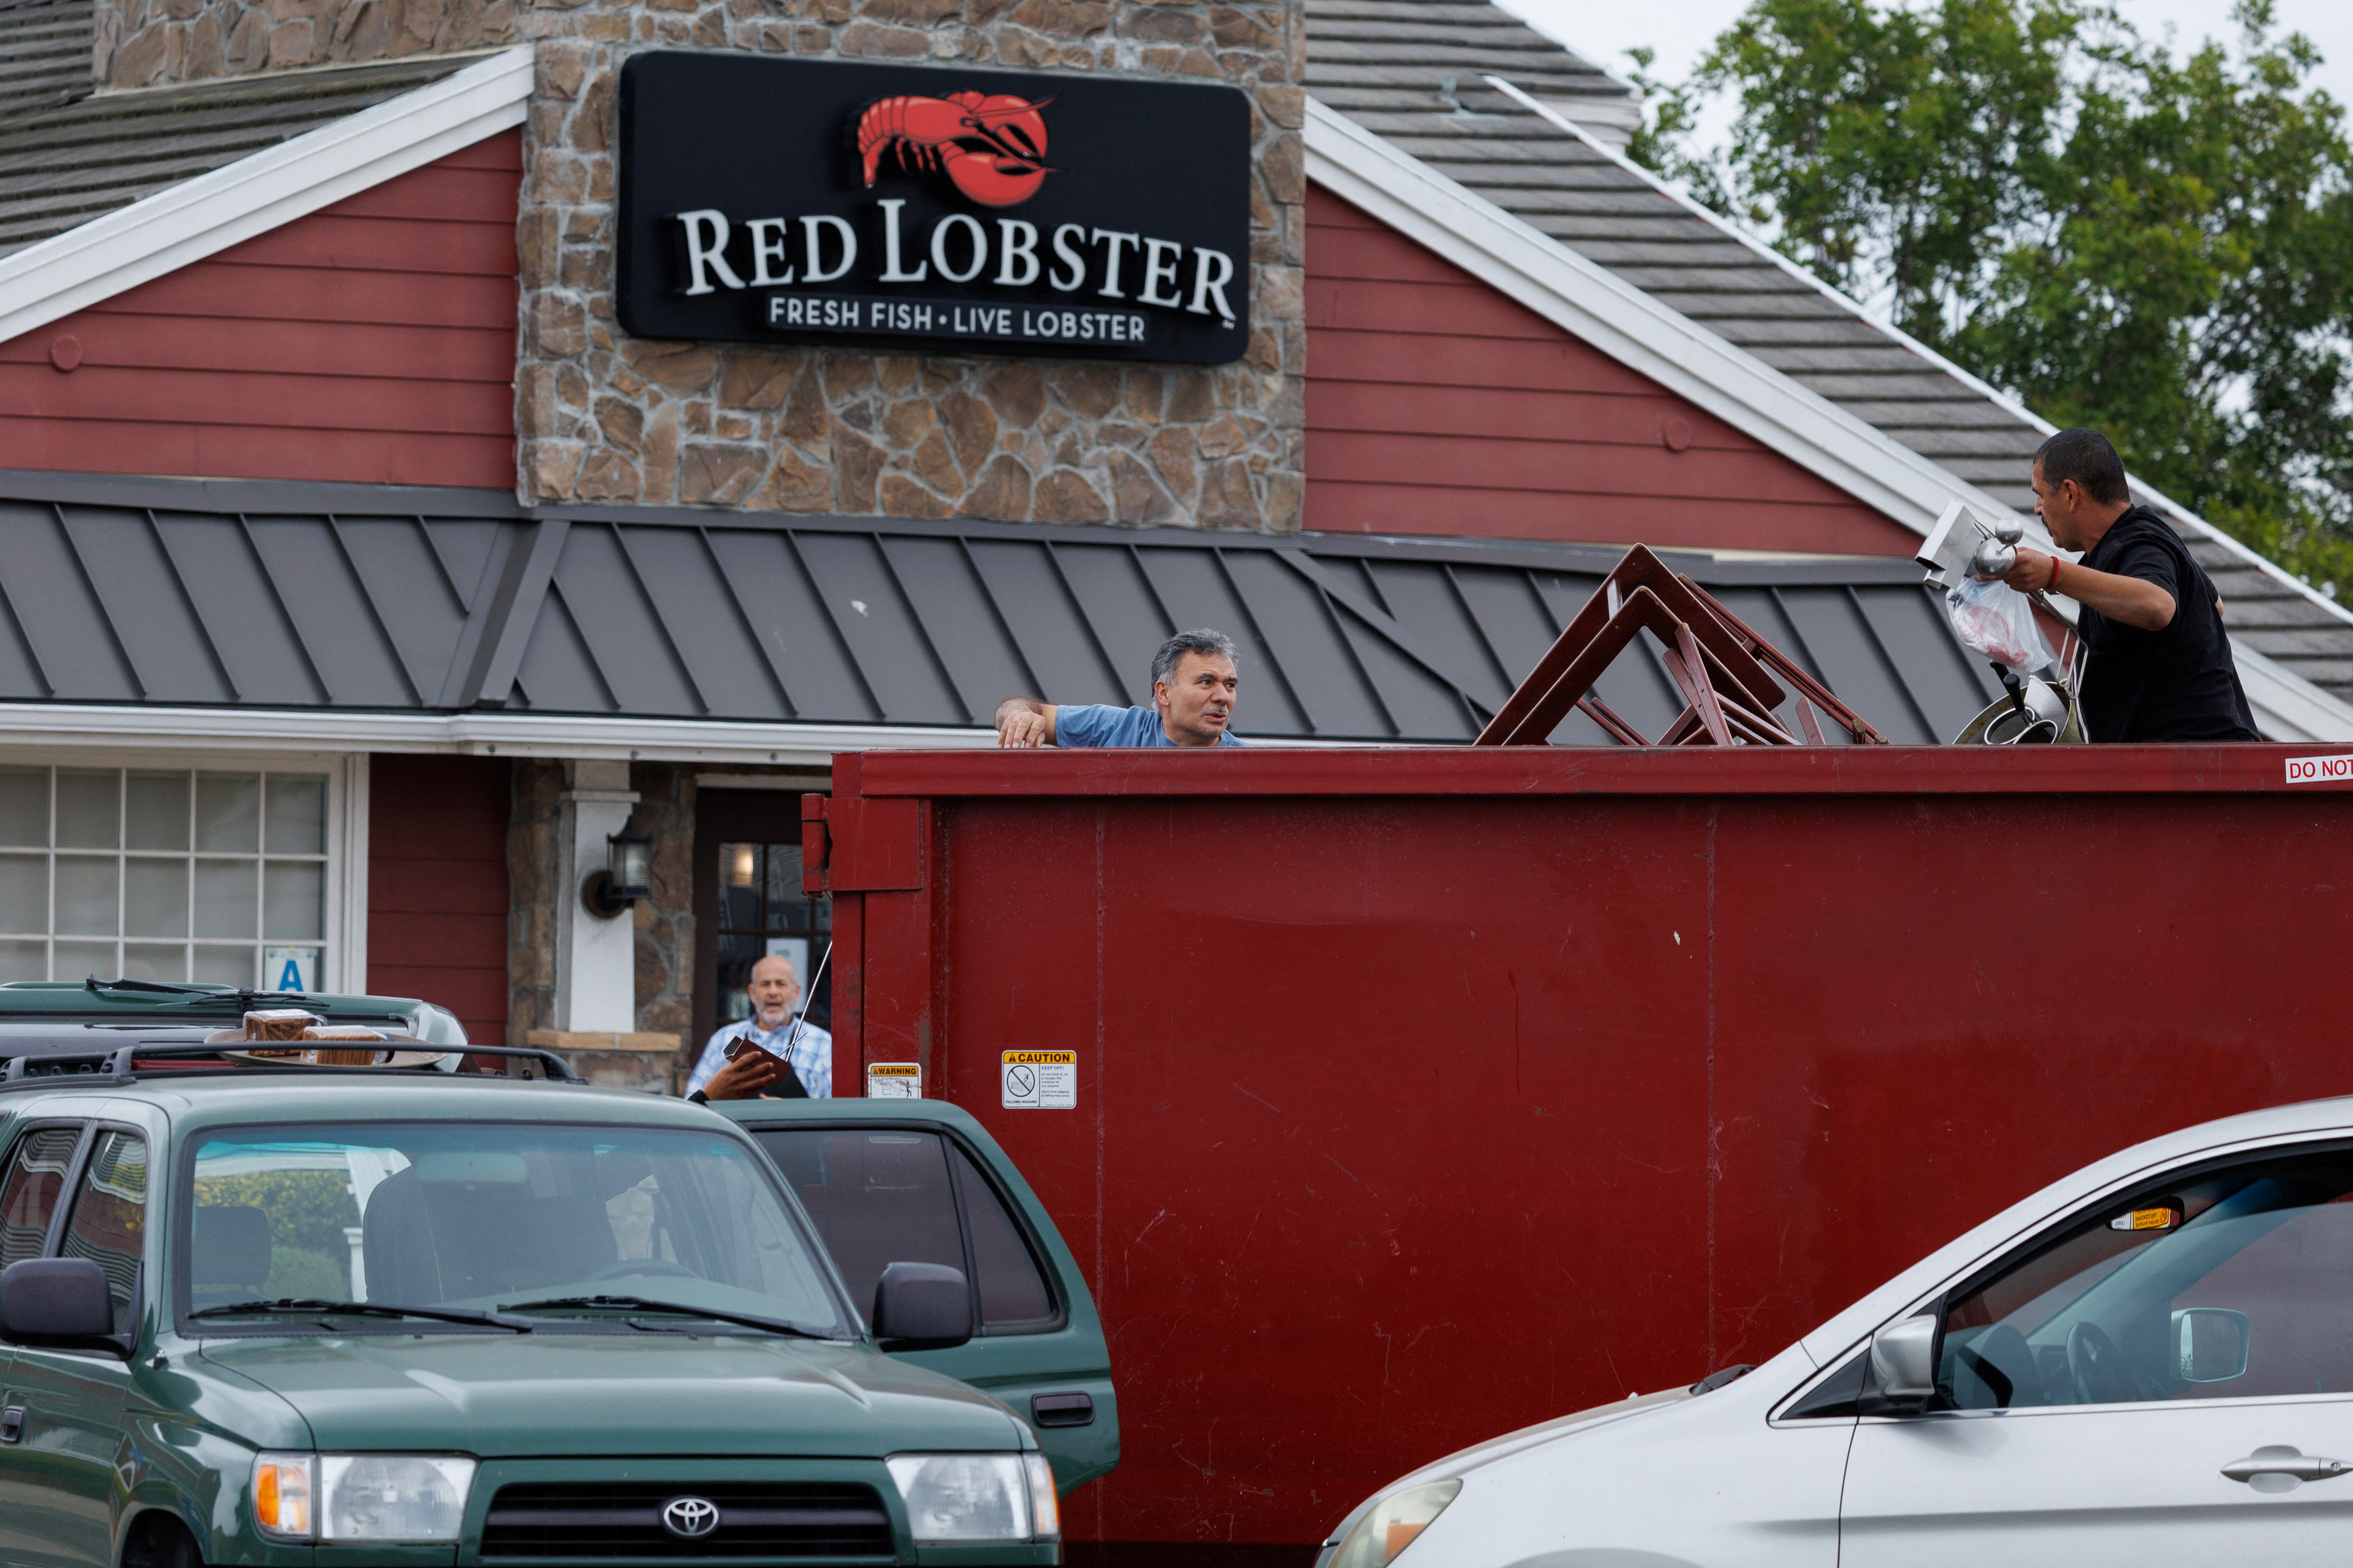 Red Lobster restaurant's contents up for auction in California